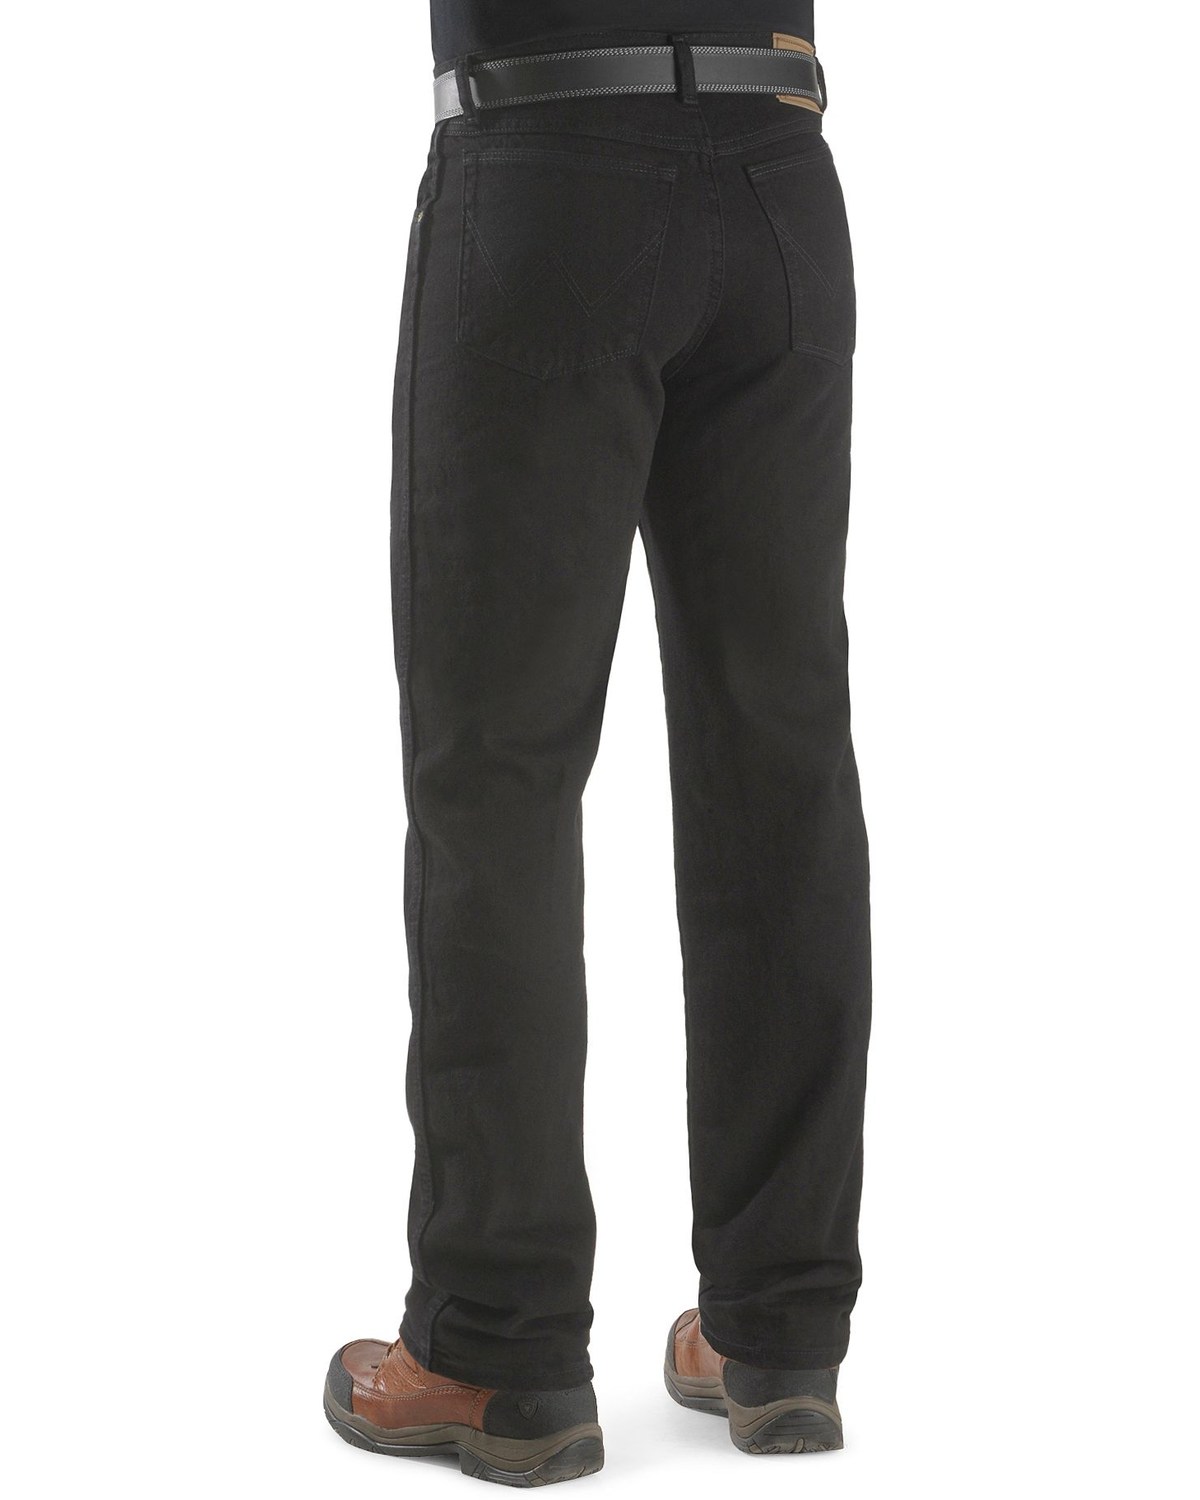 Wrangler Rugged Wear Classic Fit Jeans